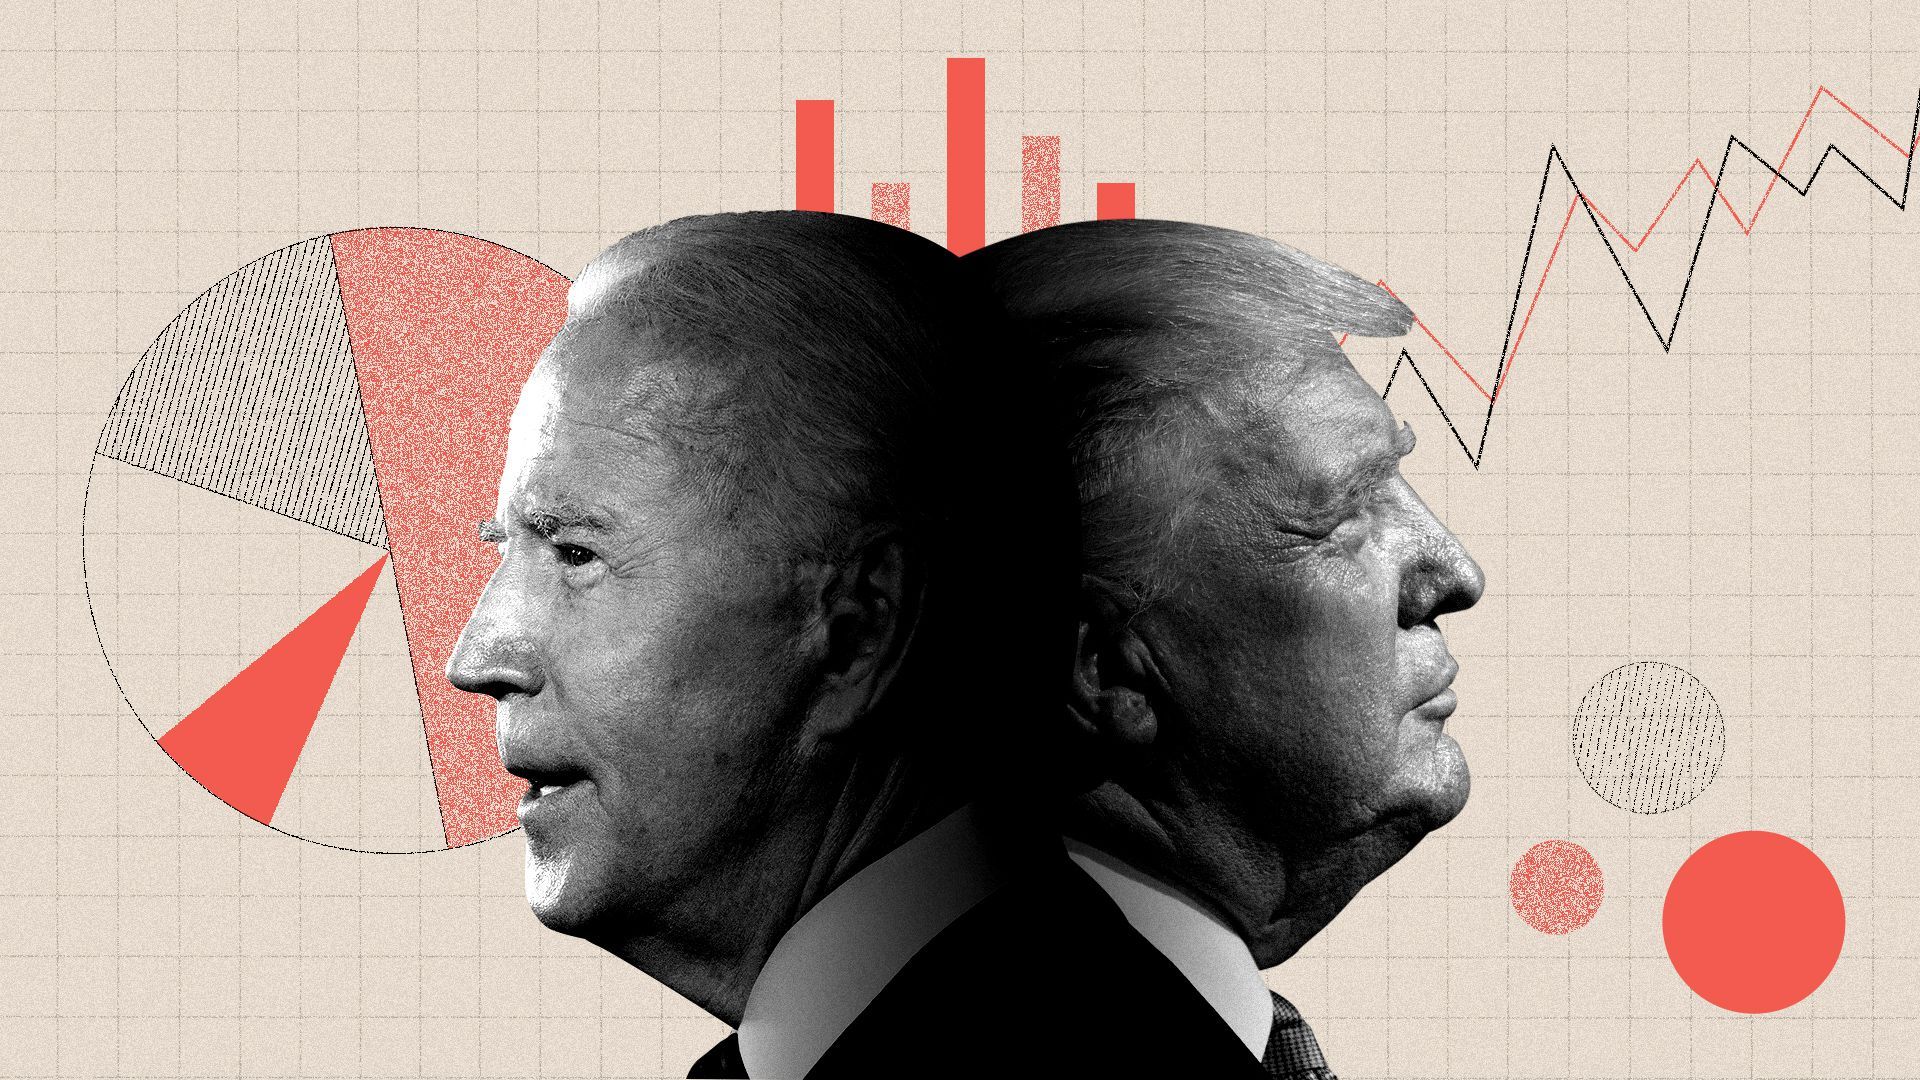 Photo illustration of President Trump and Joe Biden surrounded by data visualizations